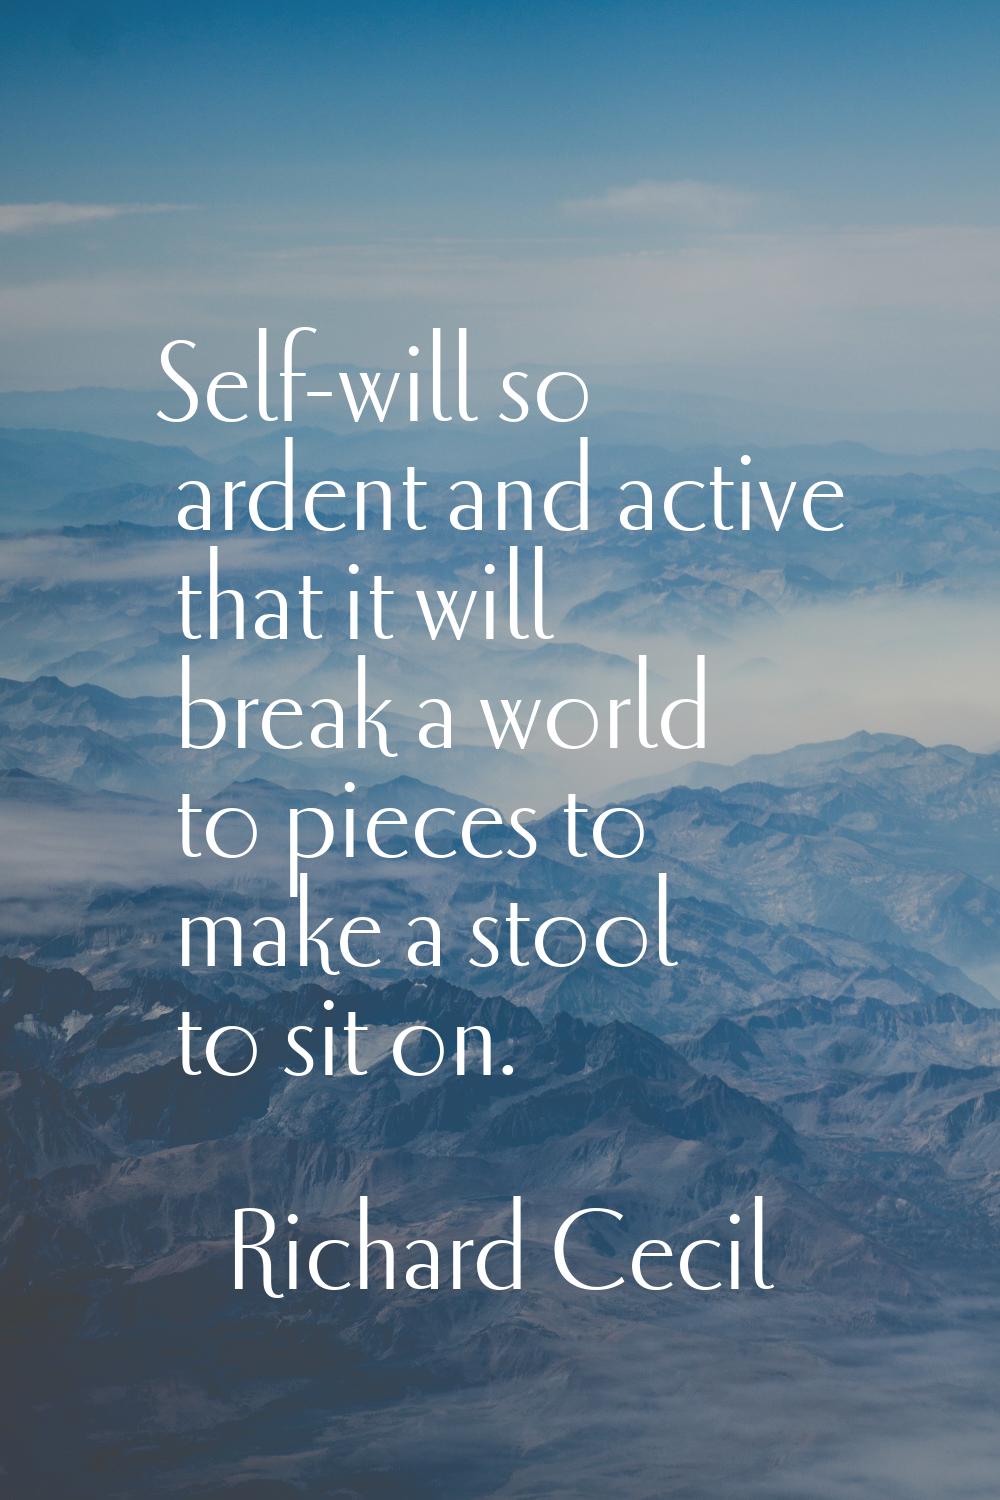 Self-will so ardent and active that it will break a world to pieces to make a stool to sit on.